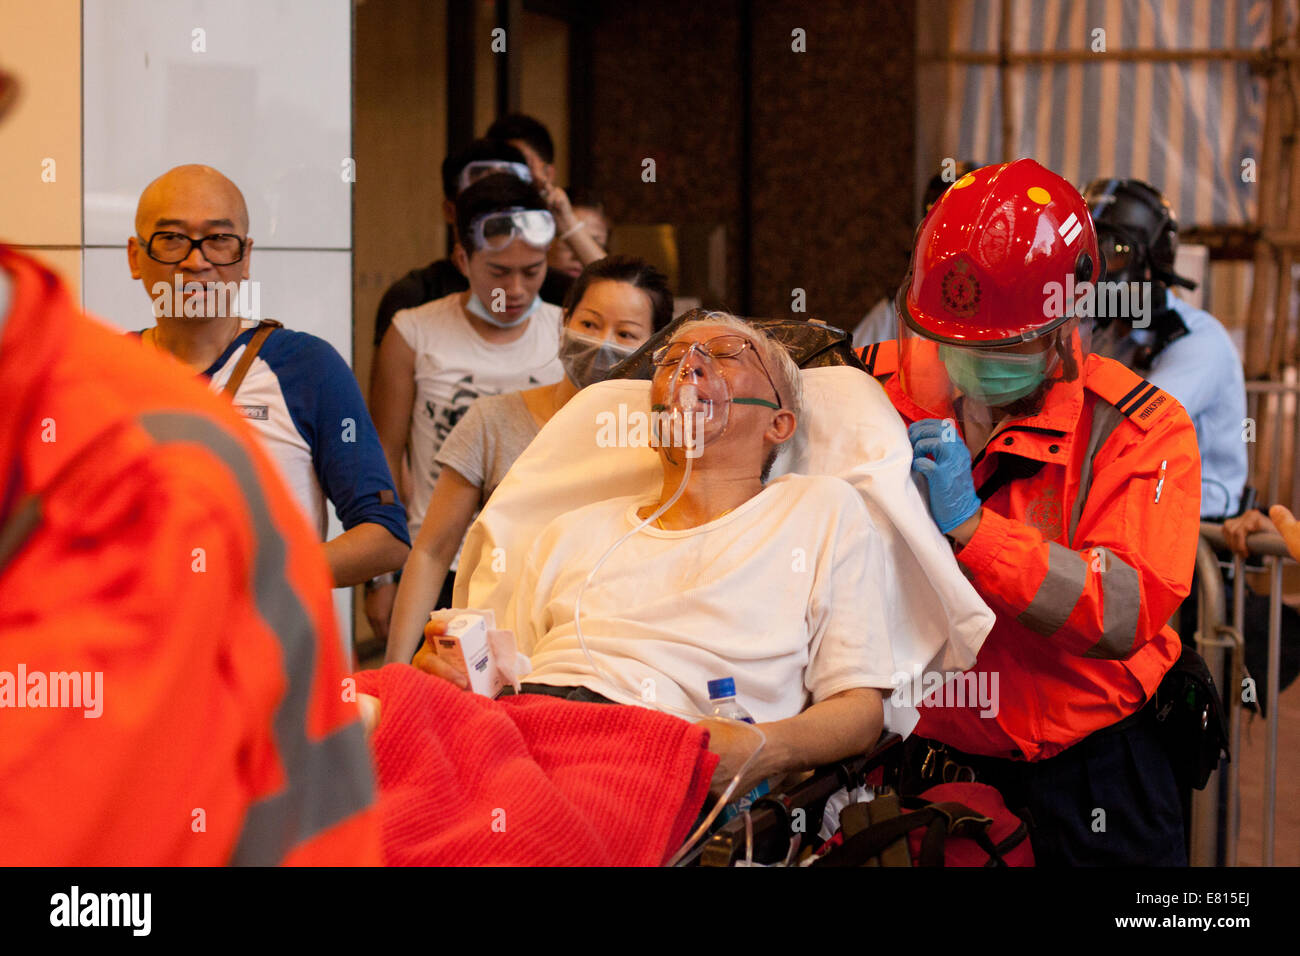 Hong Kong. 28th Sep, 2014. Elderly person attended to by medical staff, after tear gas fired during Occupy Central protests, Hong Kong, China.   Protests against decision by Beijing to offer Hong Kong voters, to choose their Chief Executive in 2017 elections from approved candidates, rather than an open list. Credit:  SCWLee/Alamy Live News Stock Photo